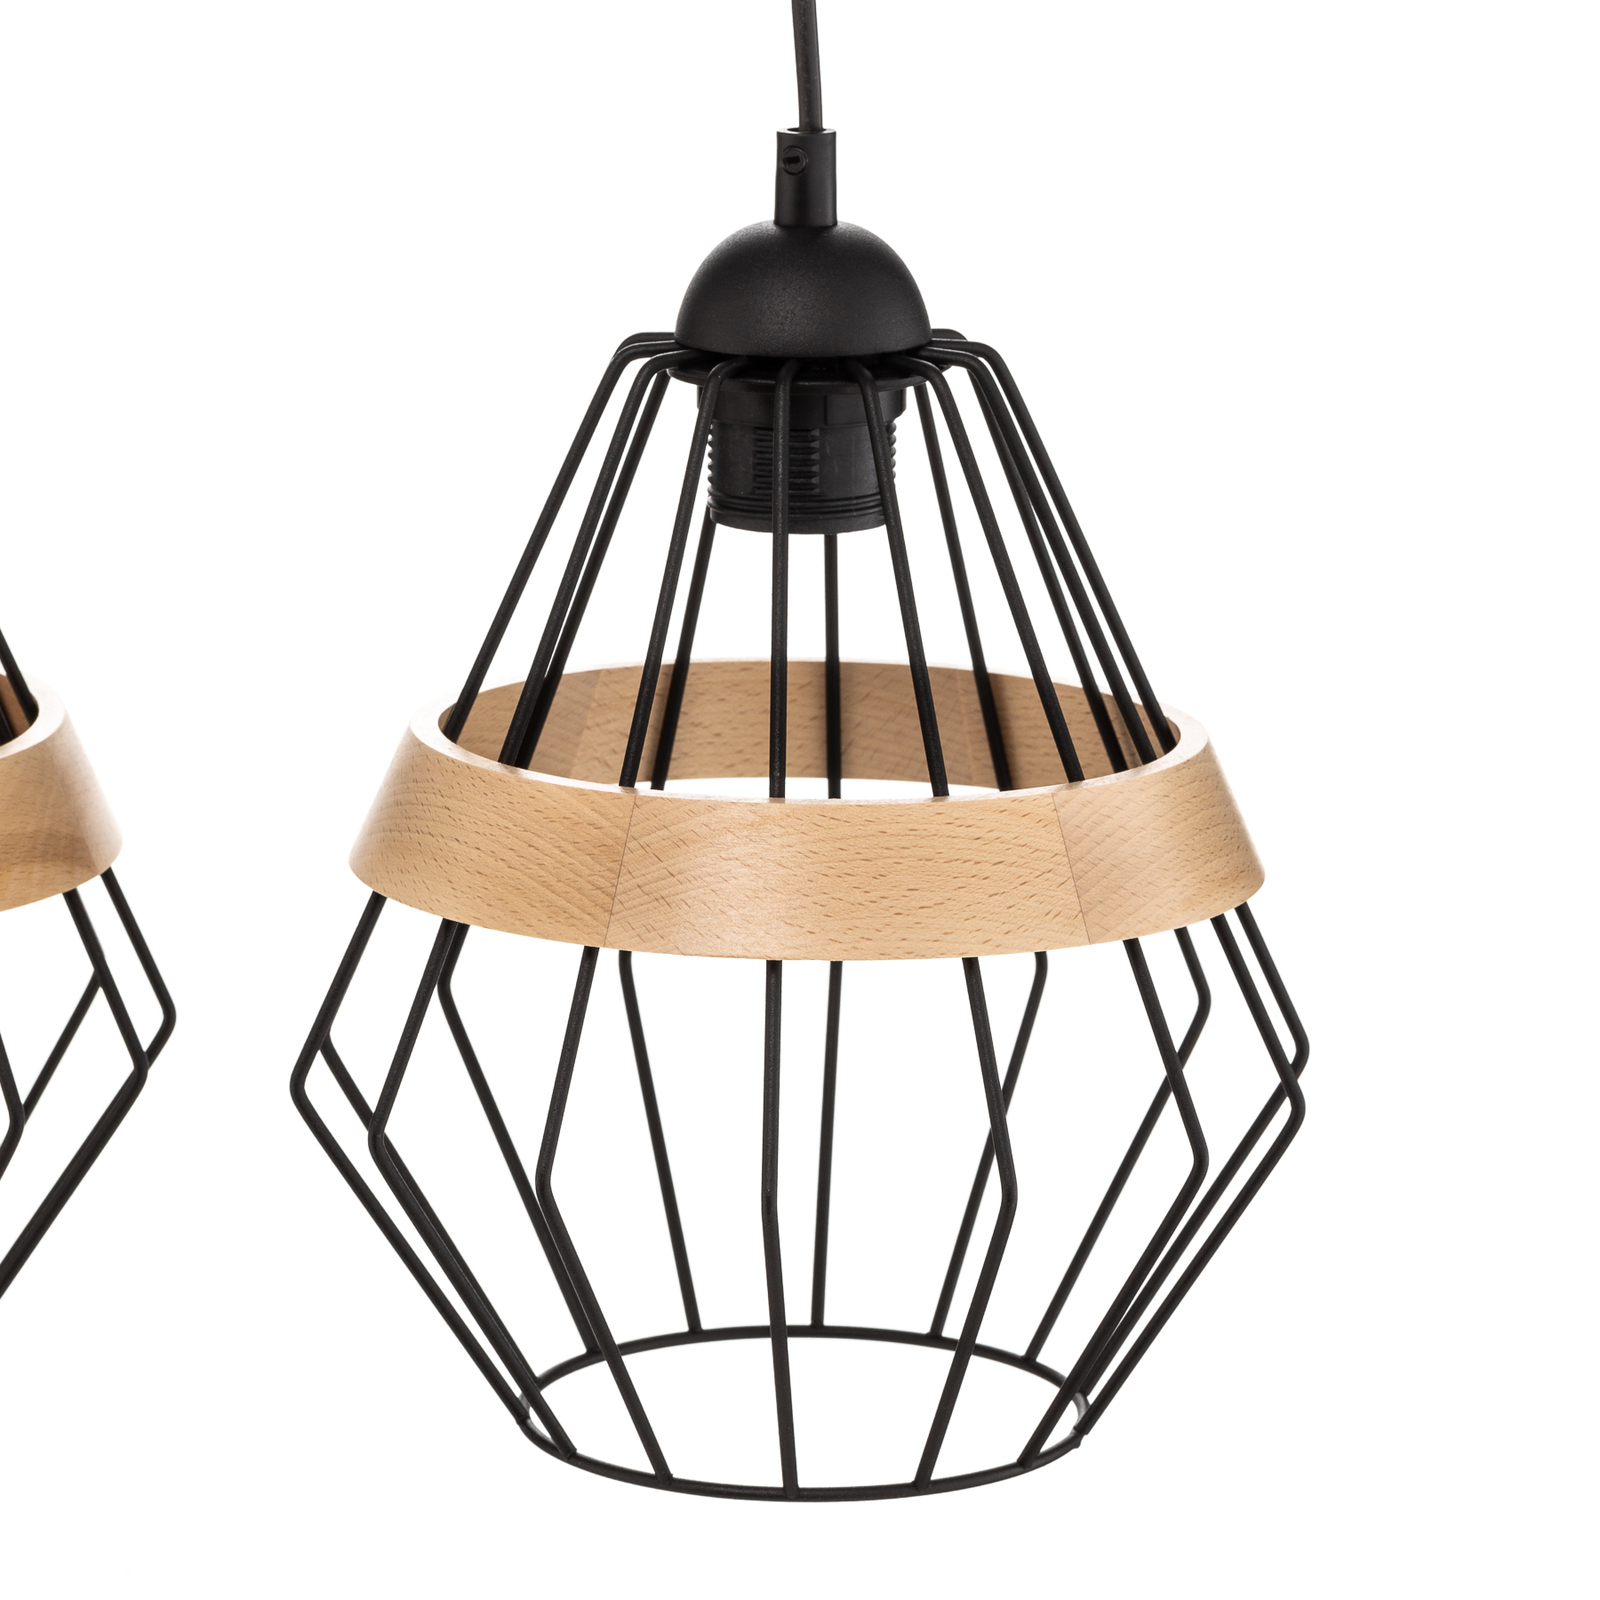 Cliff hanging light, 3 cage lampshades wooden band